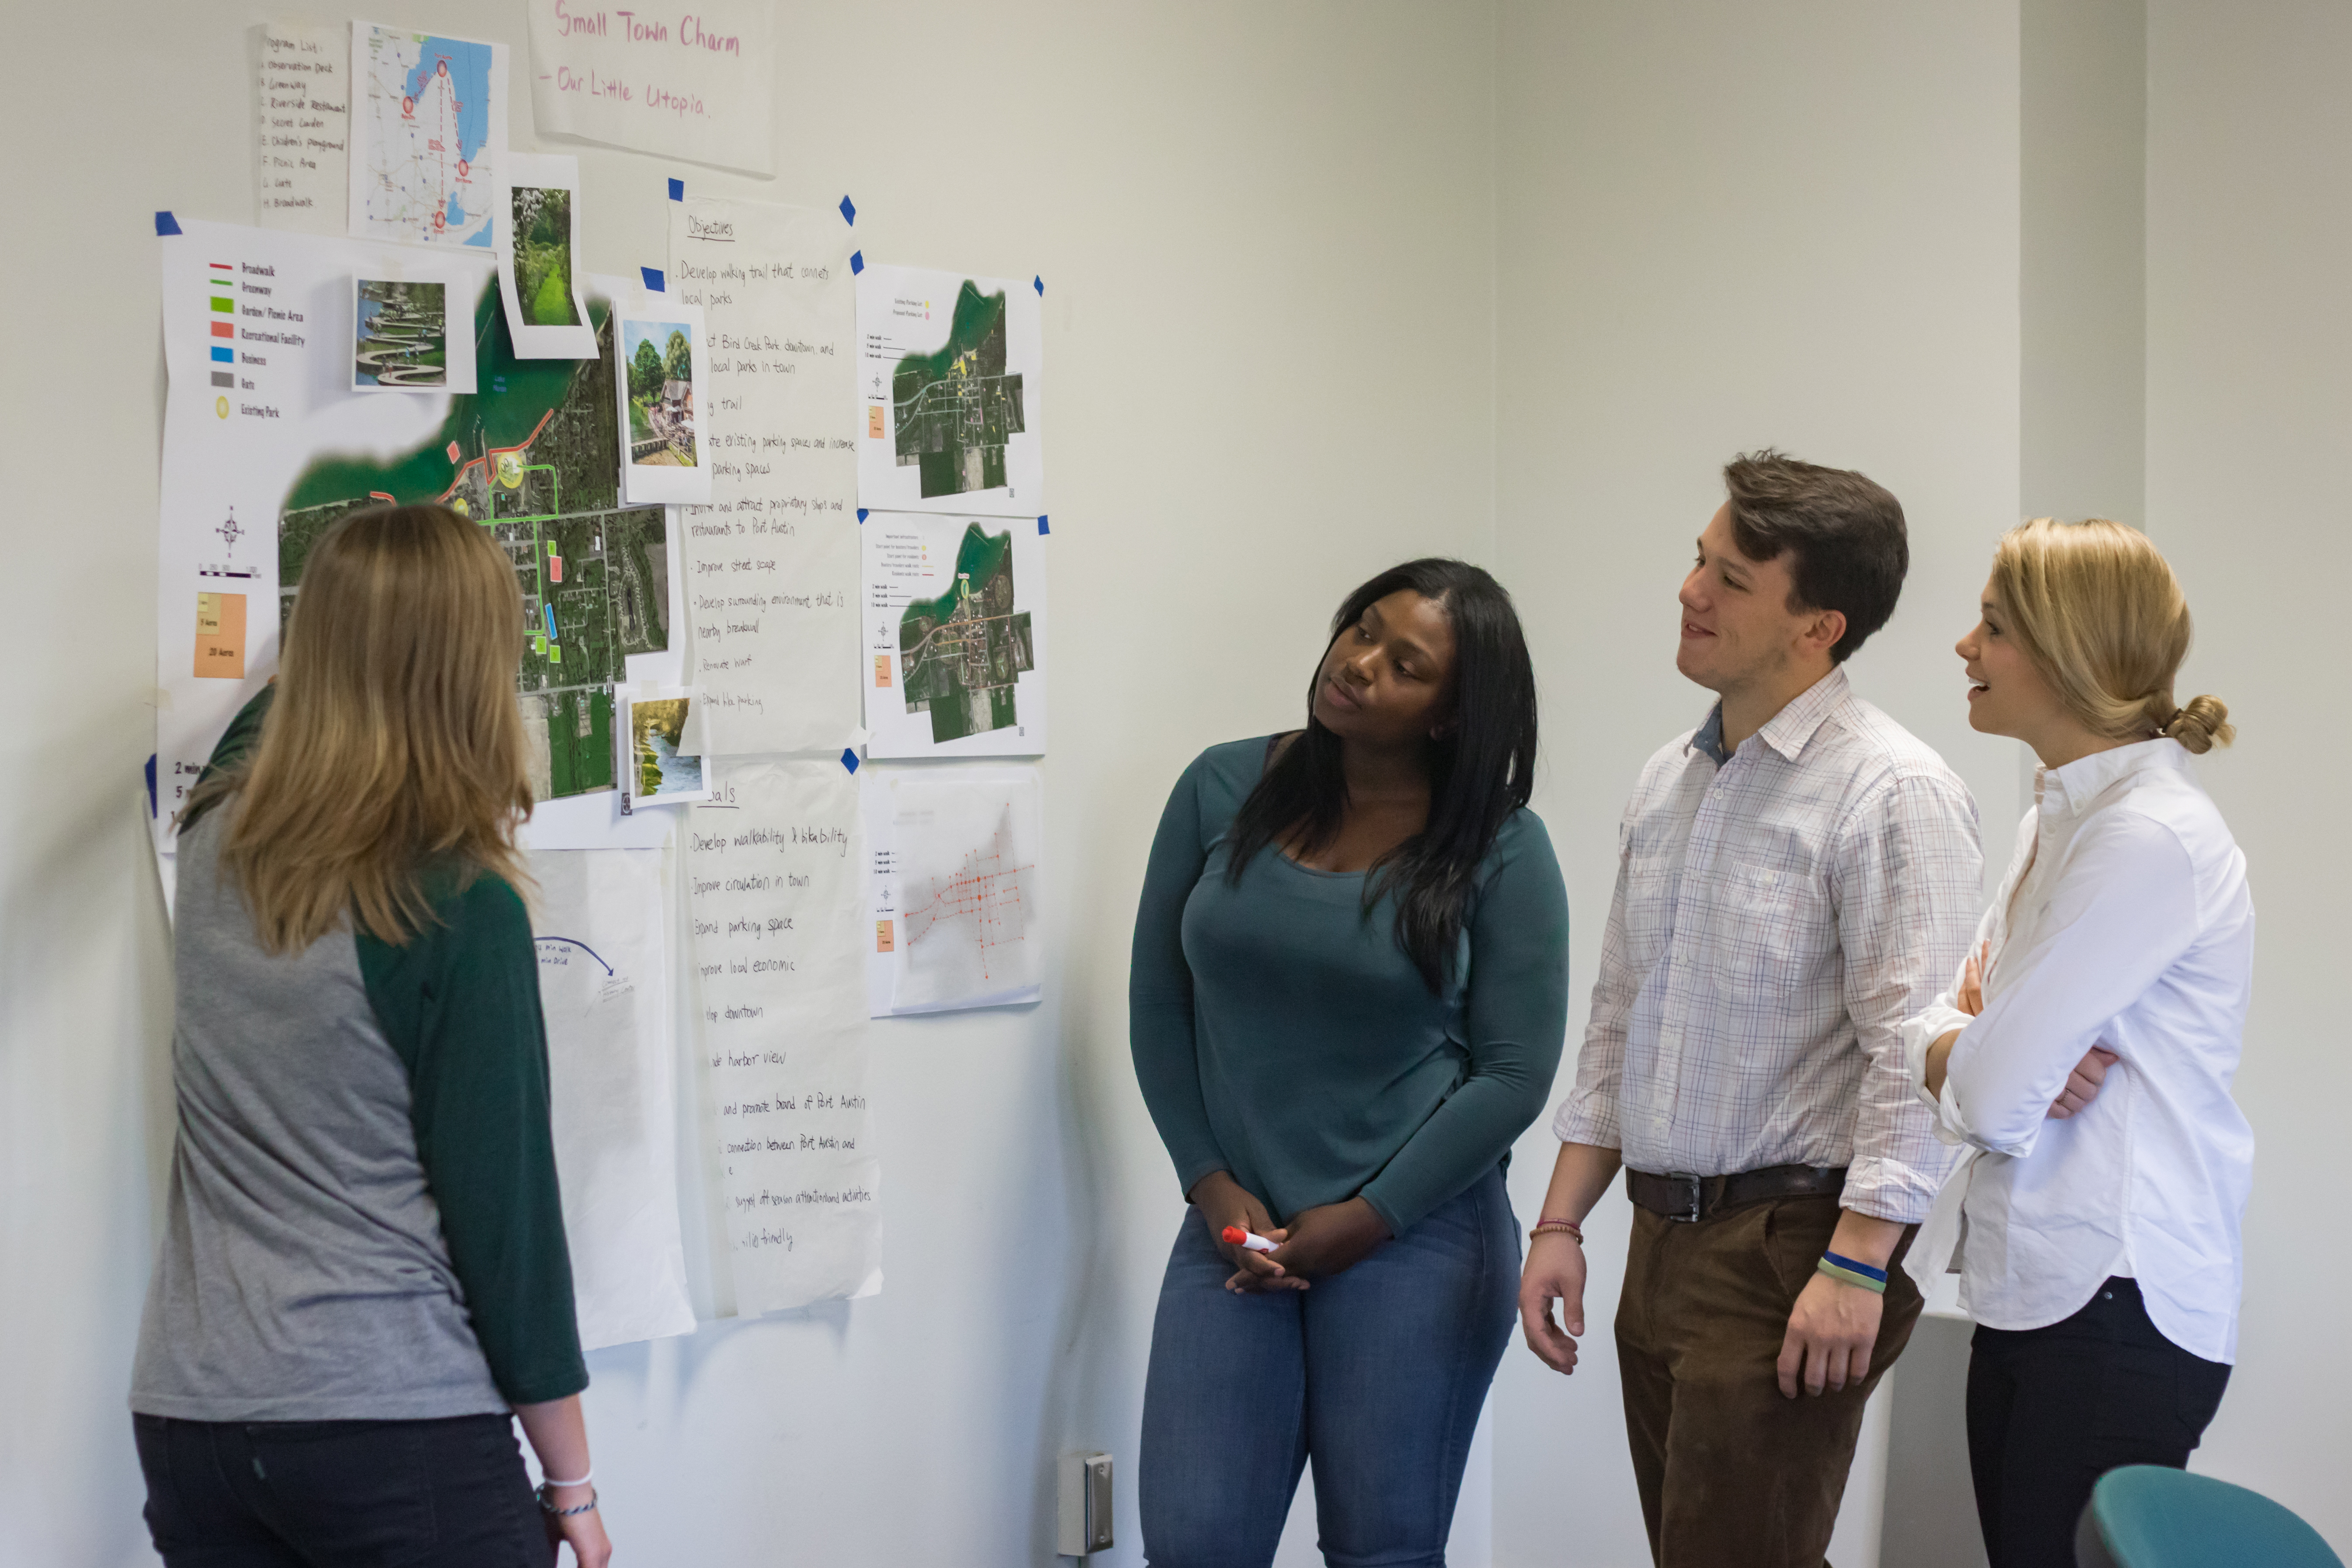 Urban and Regional Planning student presenting a poster while others watch.